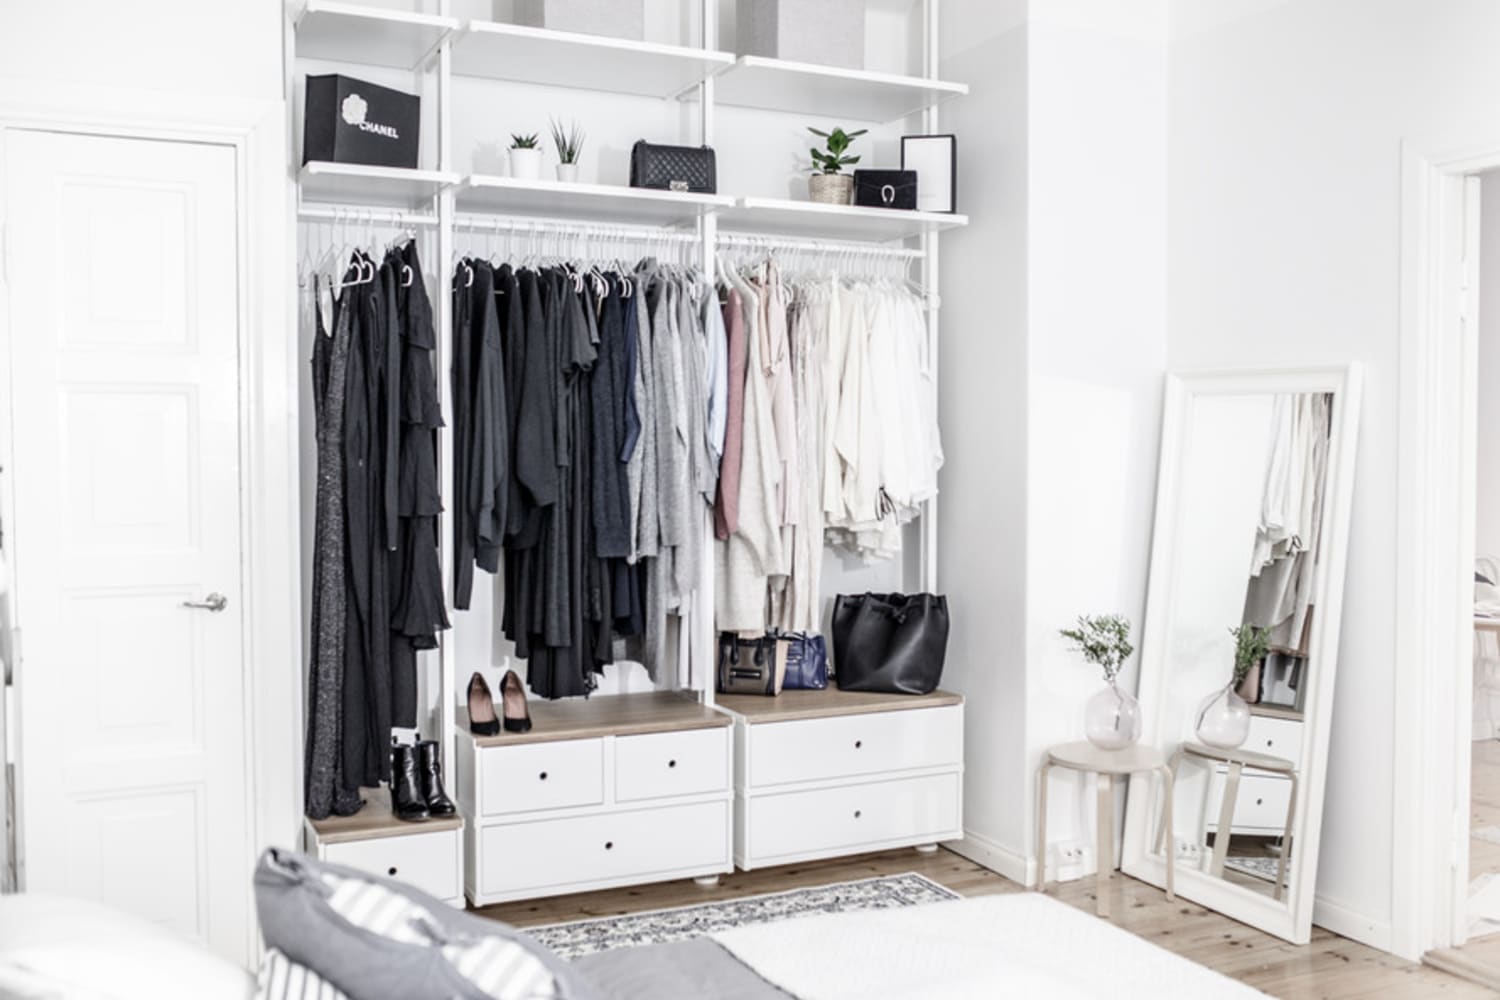 Amfibisch Momentum Afname IKEA Closets to Create a Custom Closet Look | Apartment Therapy